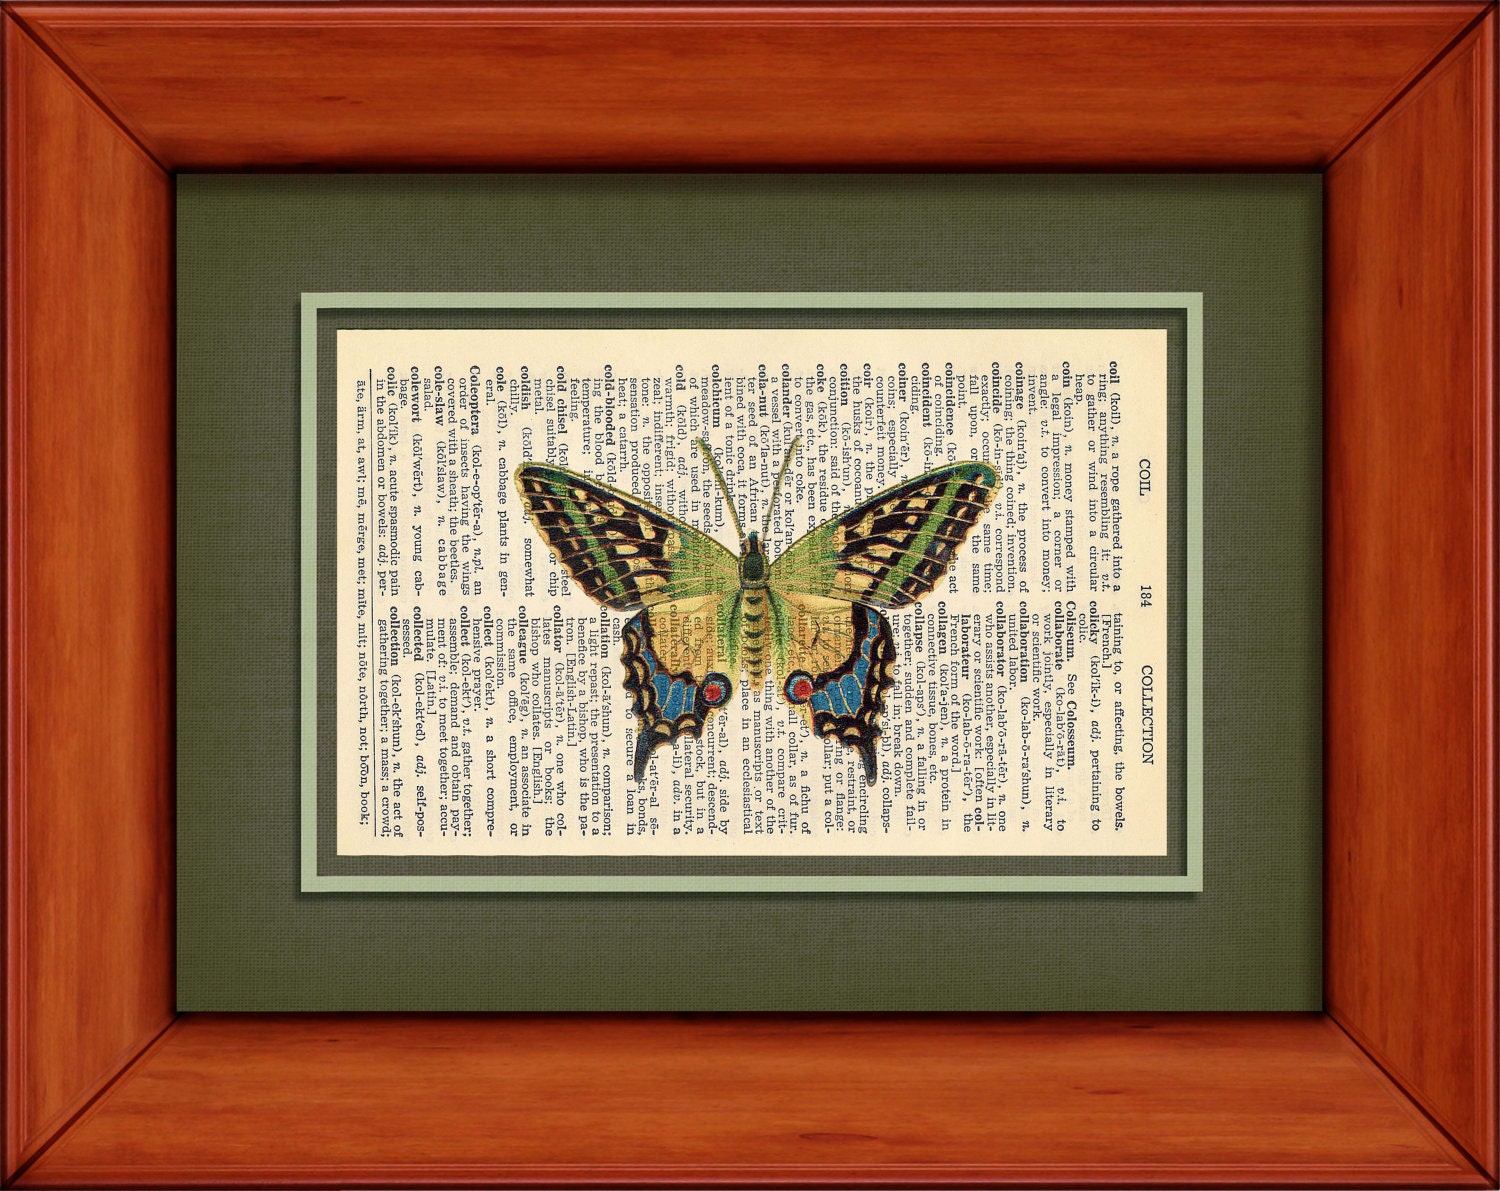 Dictionary Print - Green, Blue And Yellow Butterfly - 6 3/4" x 9 3/4" Vintage Dictionary Art Print